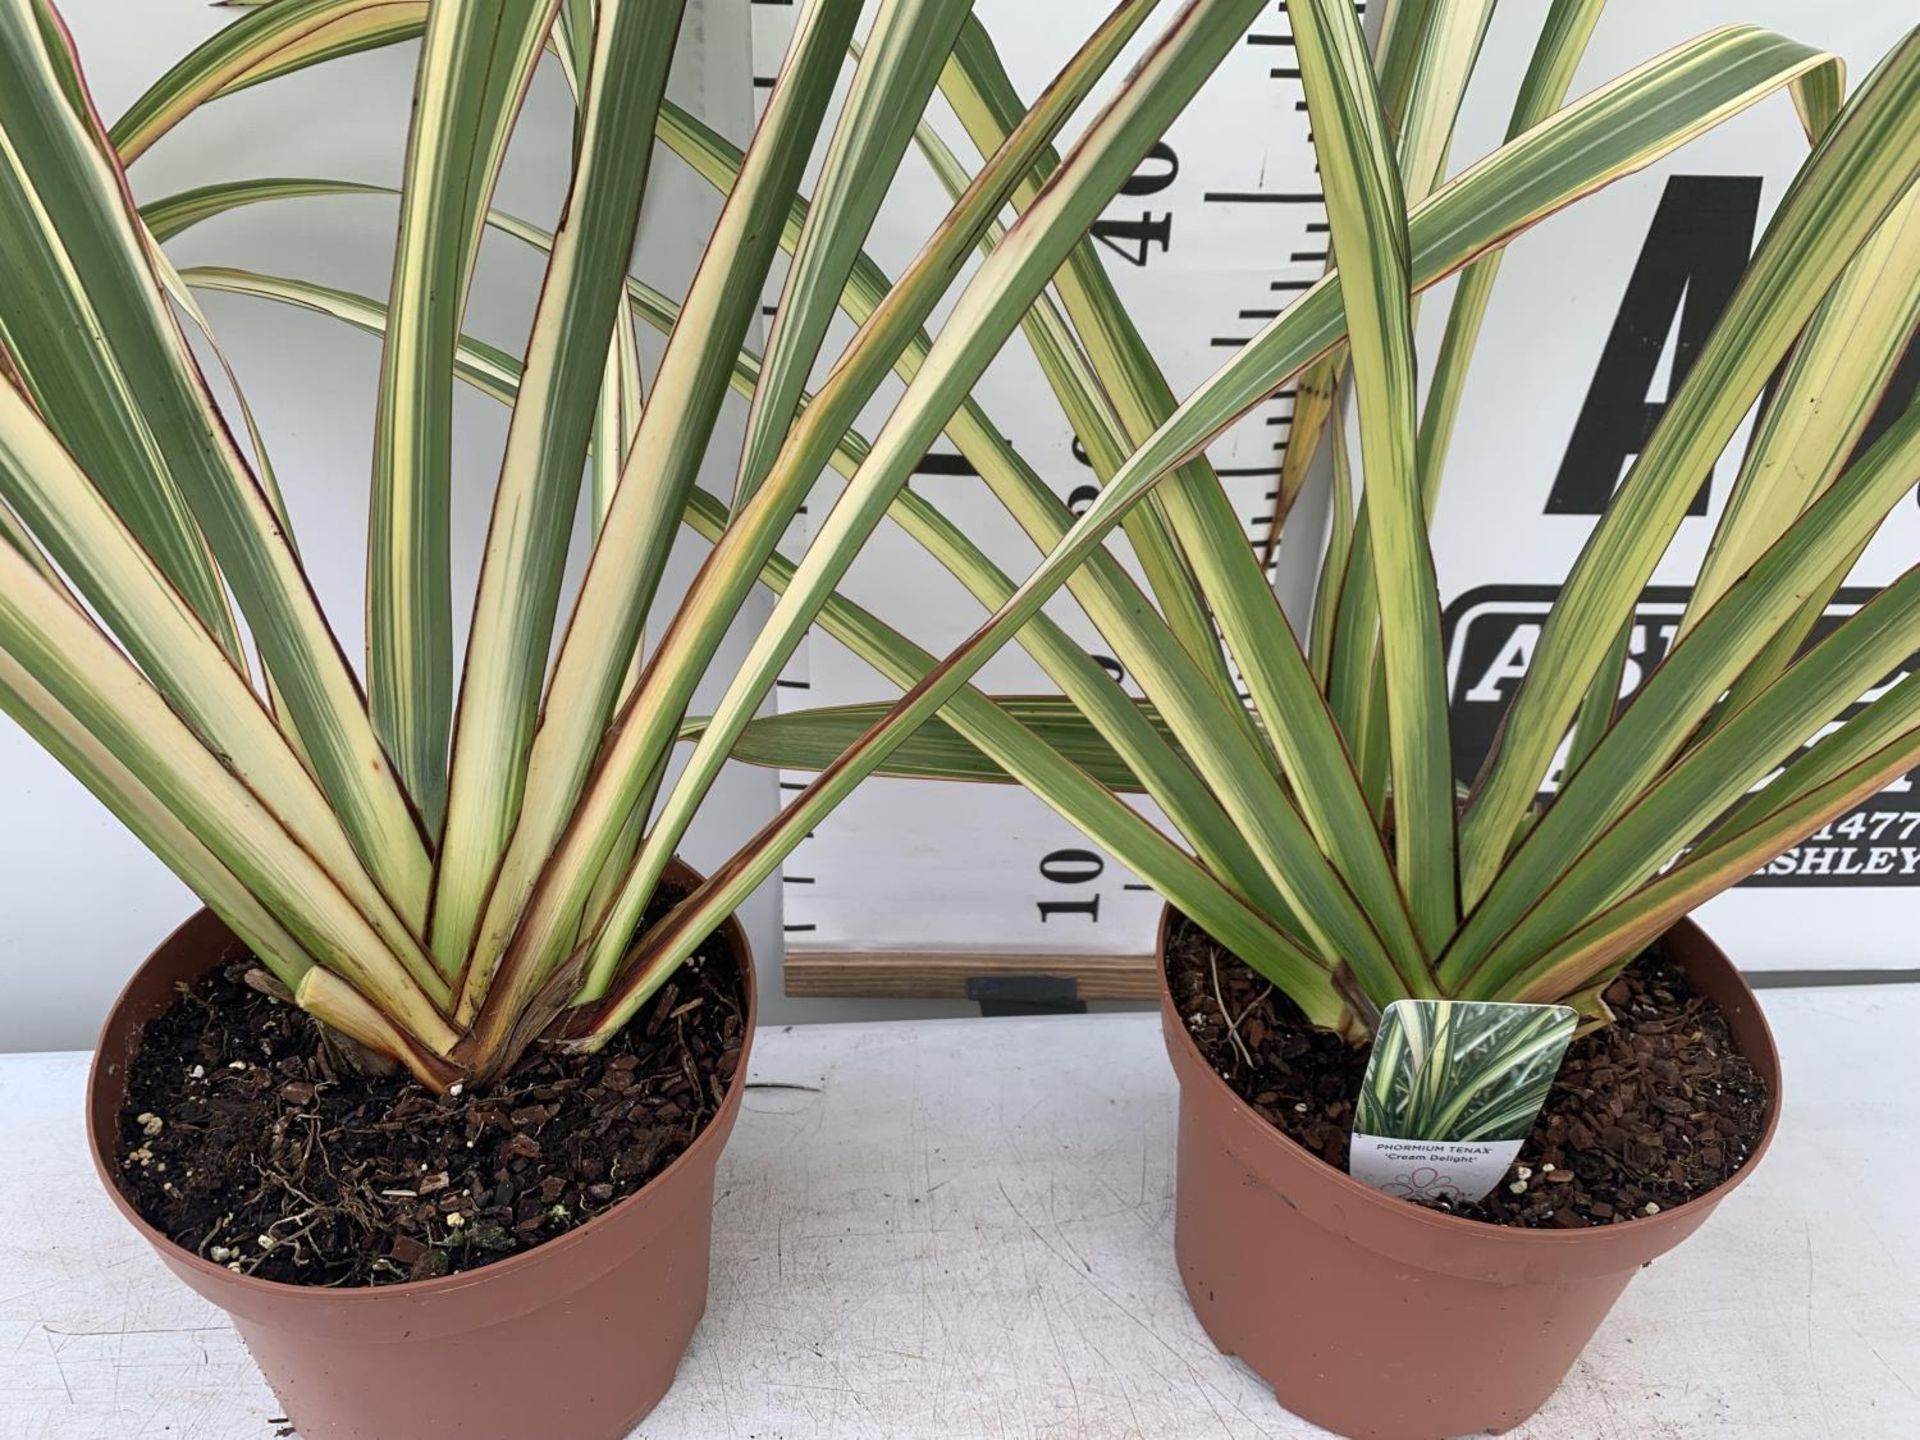 TWO GREEN PHORMIUM TENAX 'CREAM DELIGHT' APPROX 70CM IN HEIGHT IN 3 LTR POTS PLUS VAT TO BE SOLD FOR - Image 3 of 5